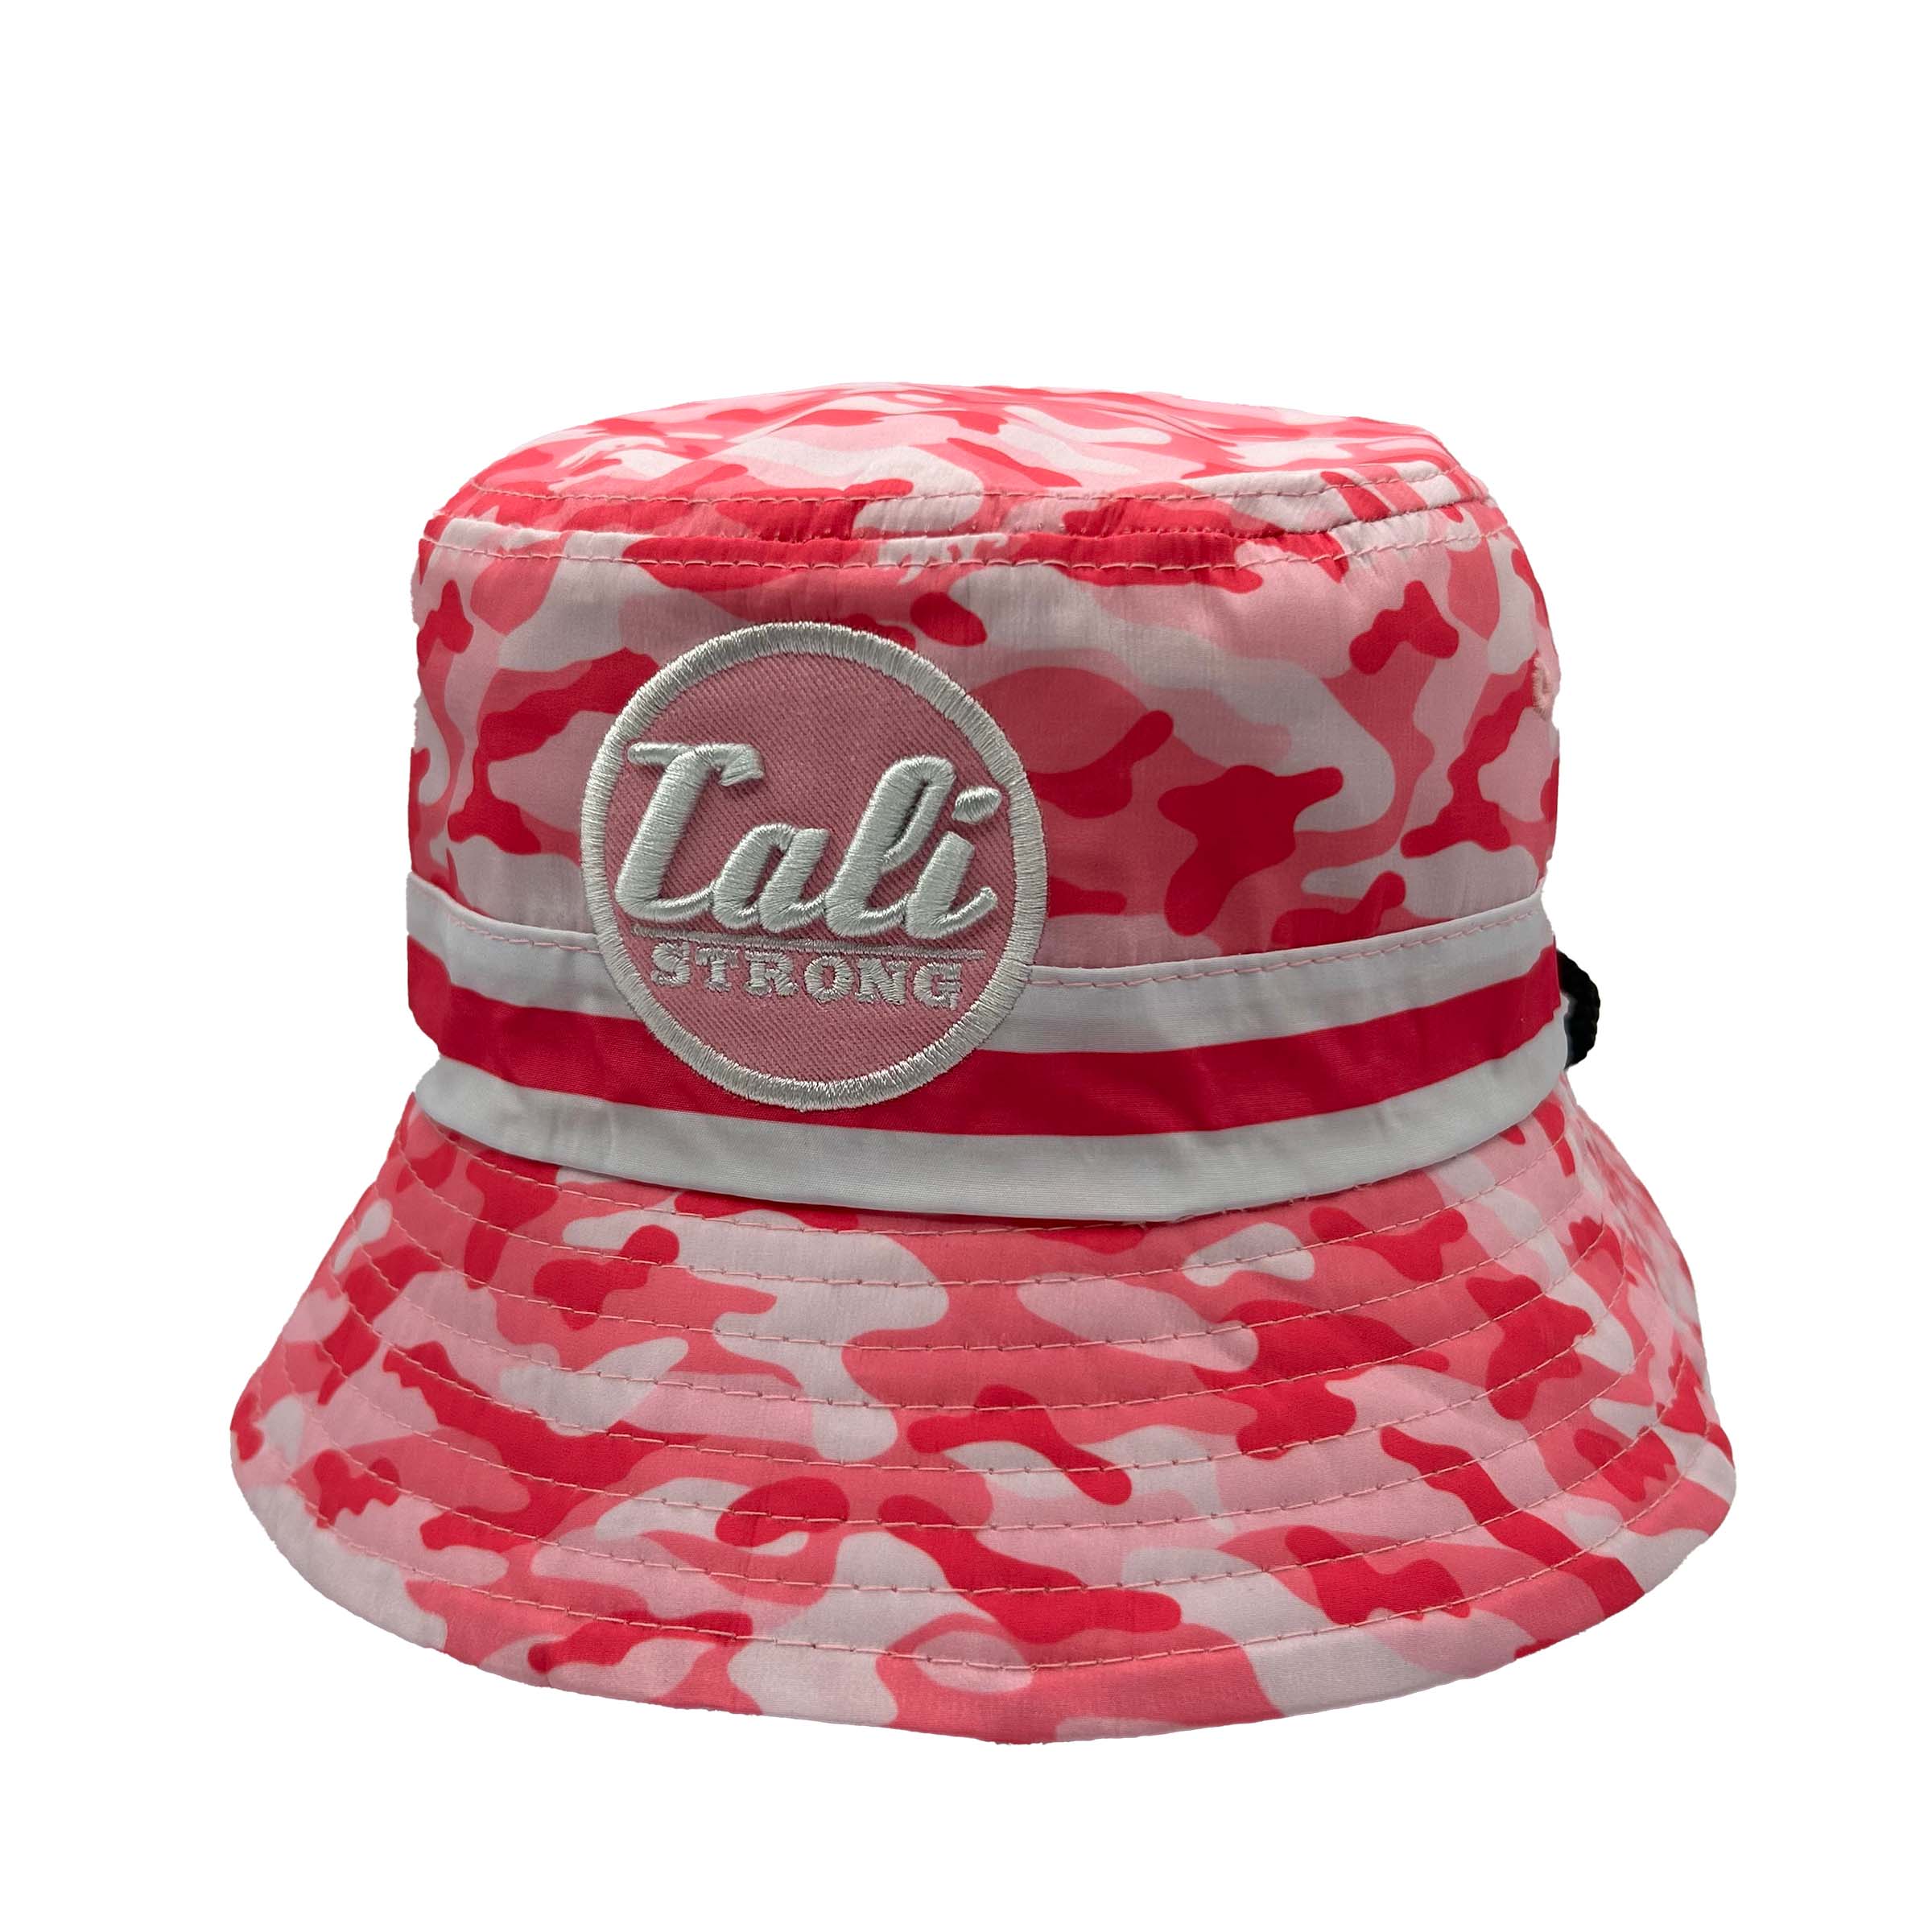 CALI Strong Pink Camo Reversible Bucket Hat Pink Tactical Morale Patch - Bucket Hat - Image 3 - CALI Strong